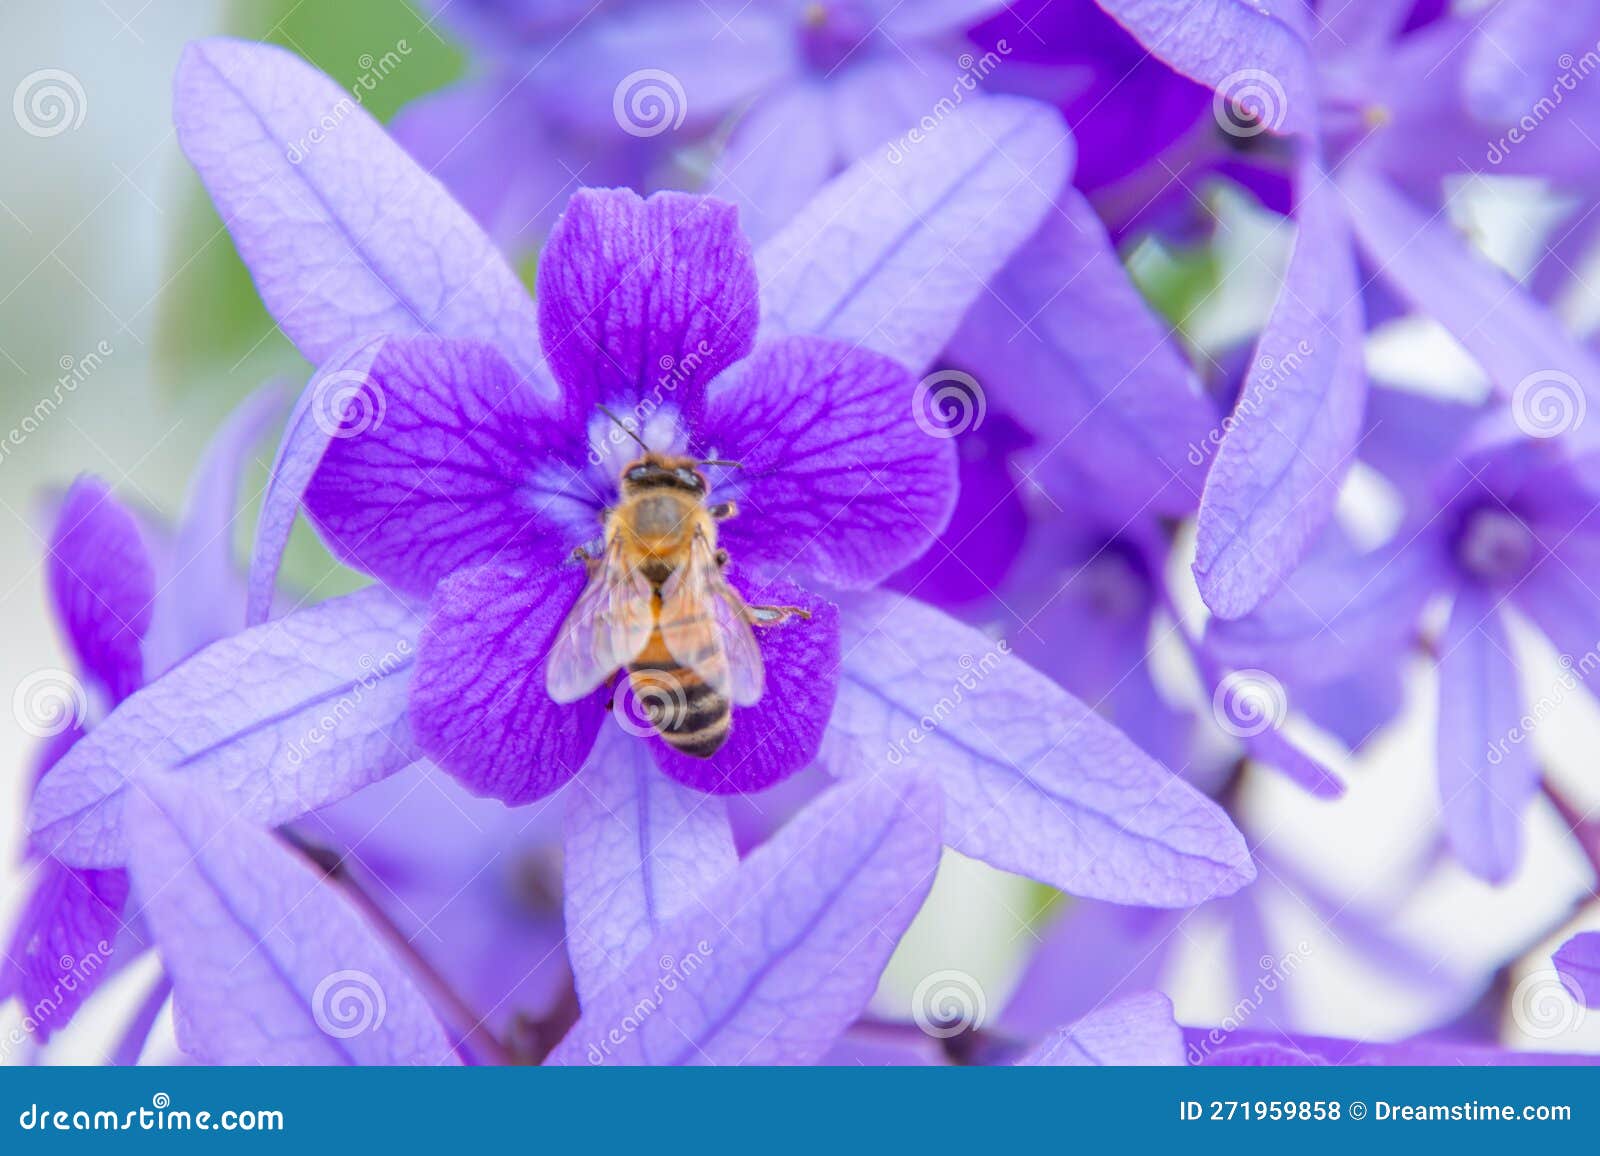 Pretty Flower in a Large Public Garden Stock Photo - Image of large ...